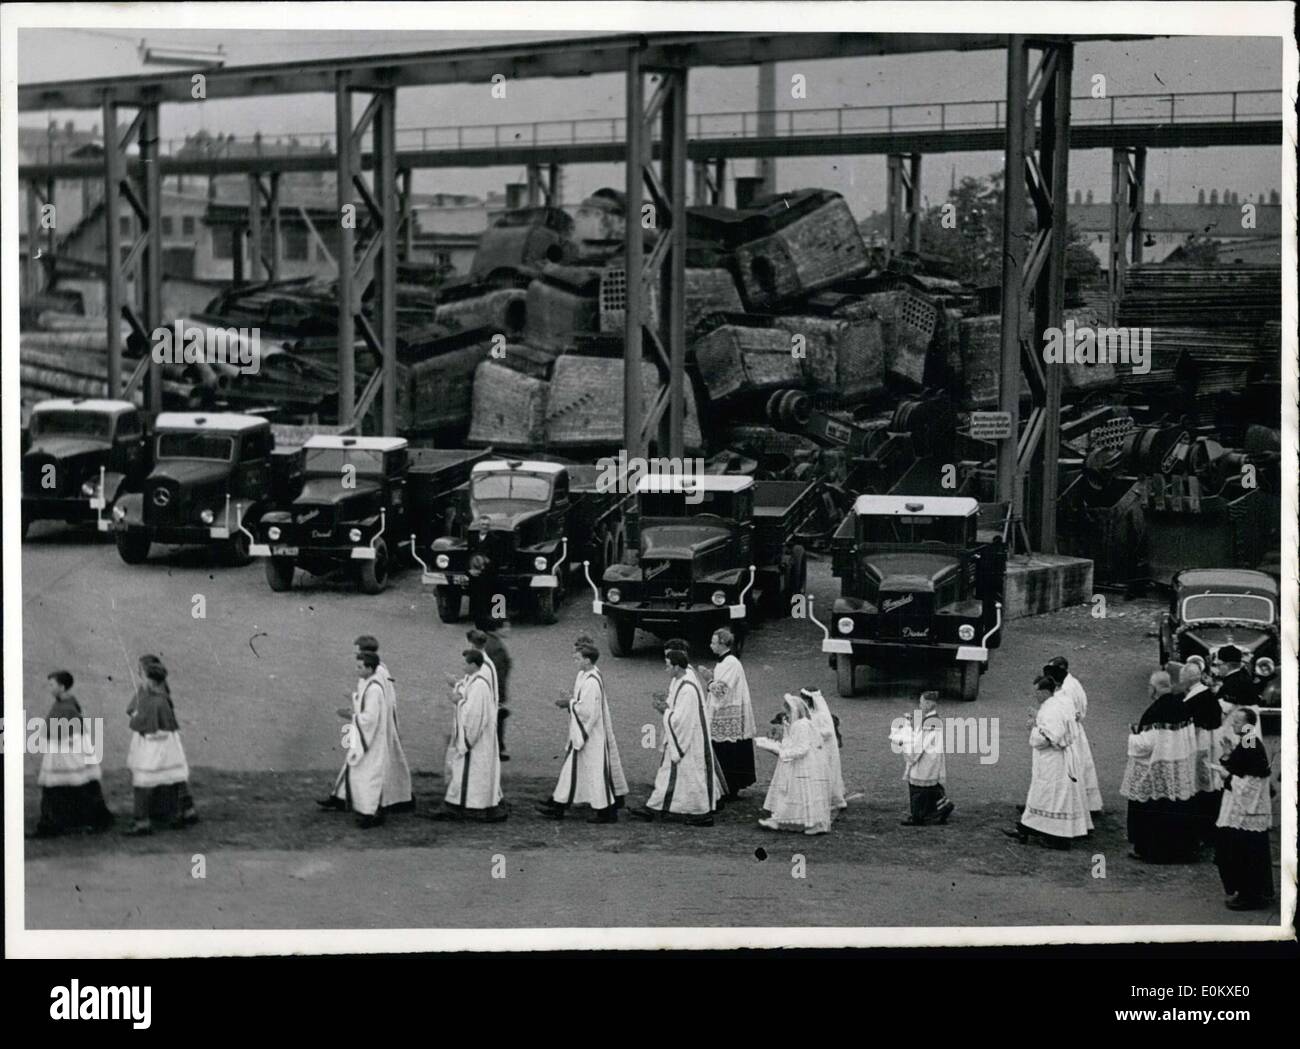 May 27, 1952 - Since the church in Obersendling bei Munich was too small to accommodate all the visitors that wanted to attend Priest Otto Vogel's first mass, they moved the sermon to this auto repair shop. Pictured here is the procession into the auto repair shop. Stock Photo